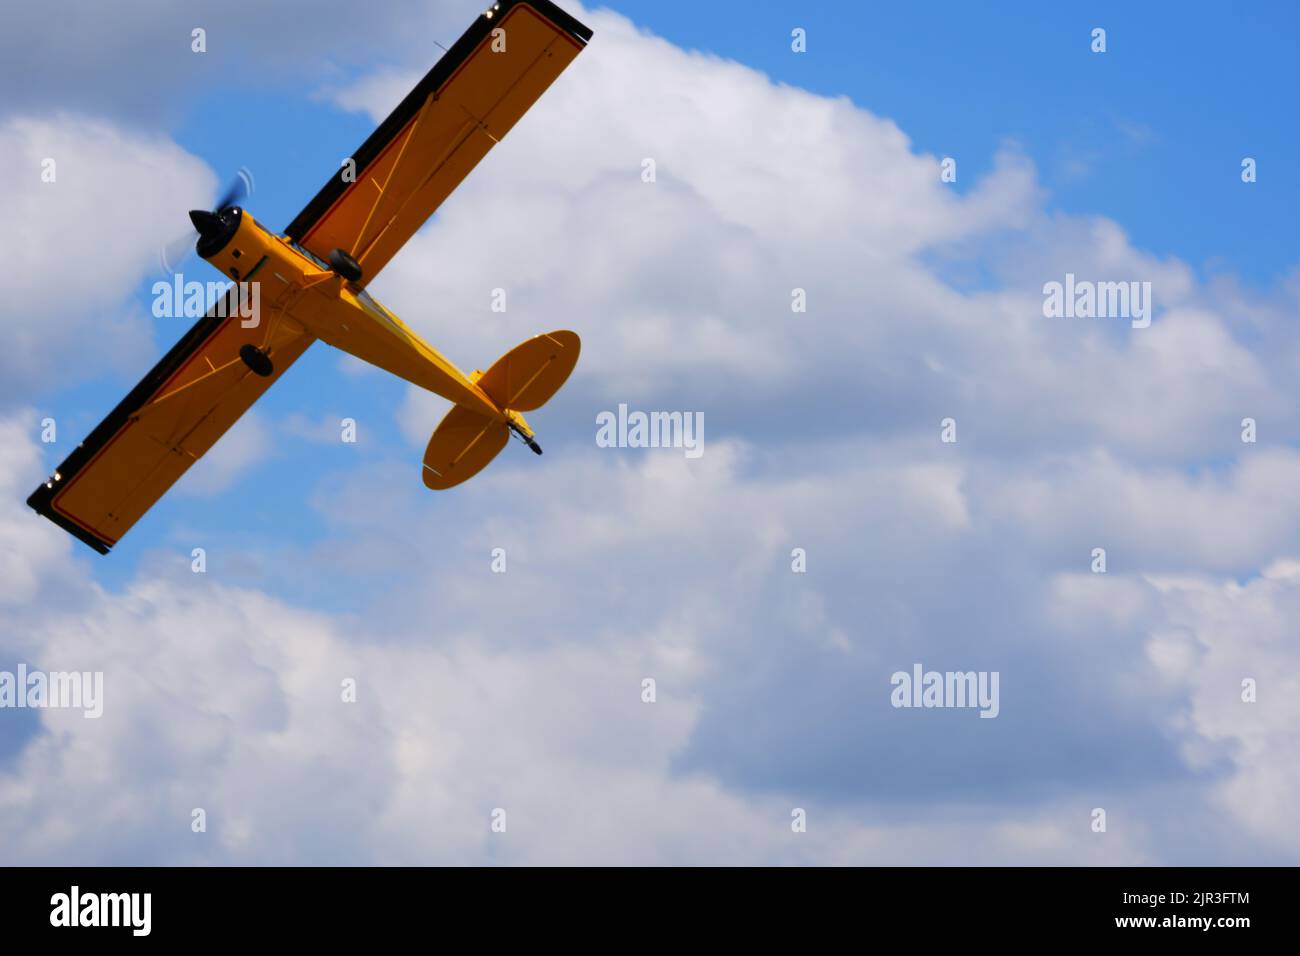 Single engine yellow propeller air plane flying at cloudy blue sky in a summer day Stock Photo